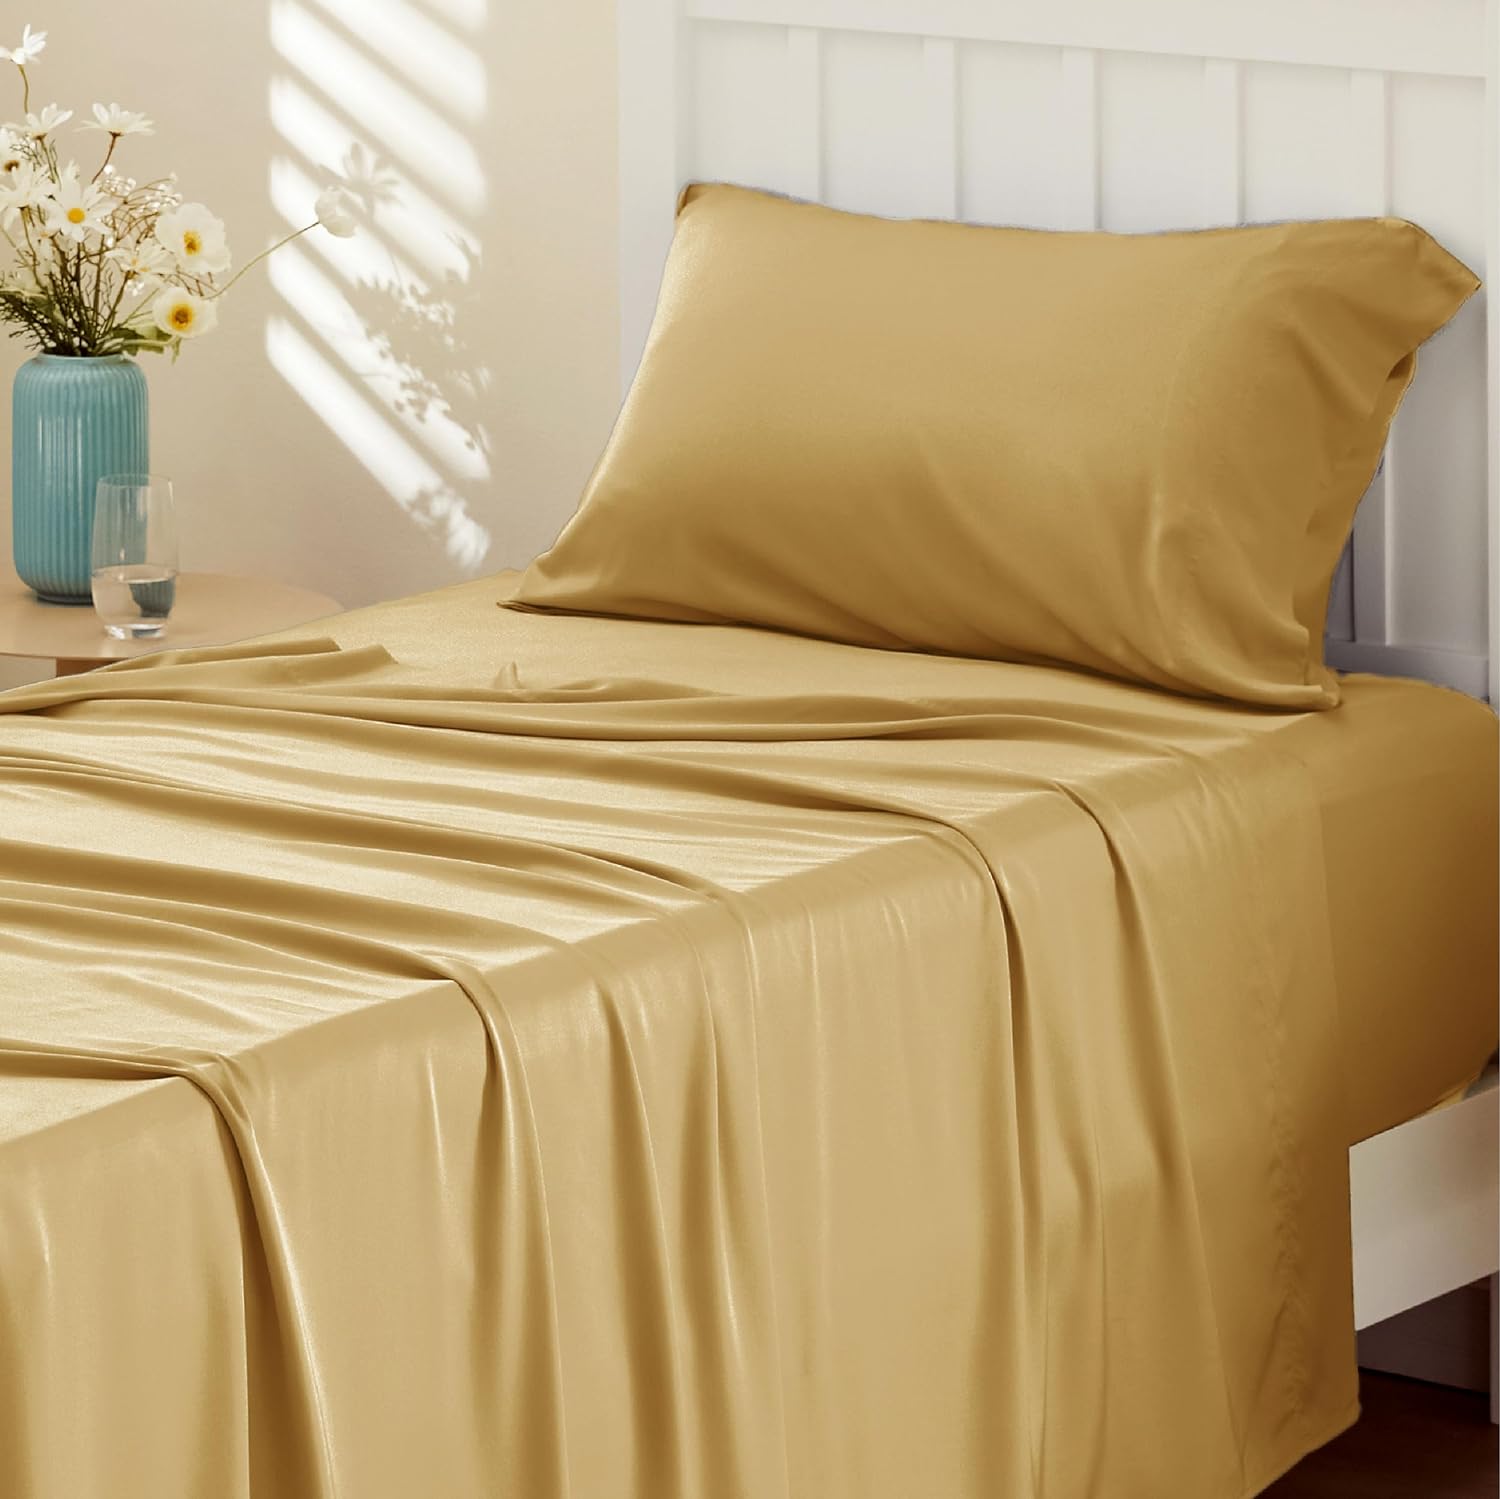 Bedsure Queen Sheets, Rayon Derived from Bamboo, Queen Cooling Sheet Set,  Deep Pocket Up to 16, Breathable & Soft Bed Sheets, Hotel Luxury Silky